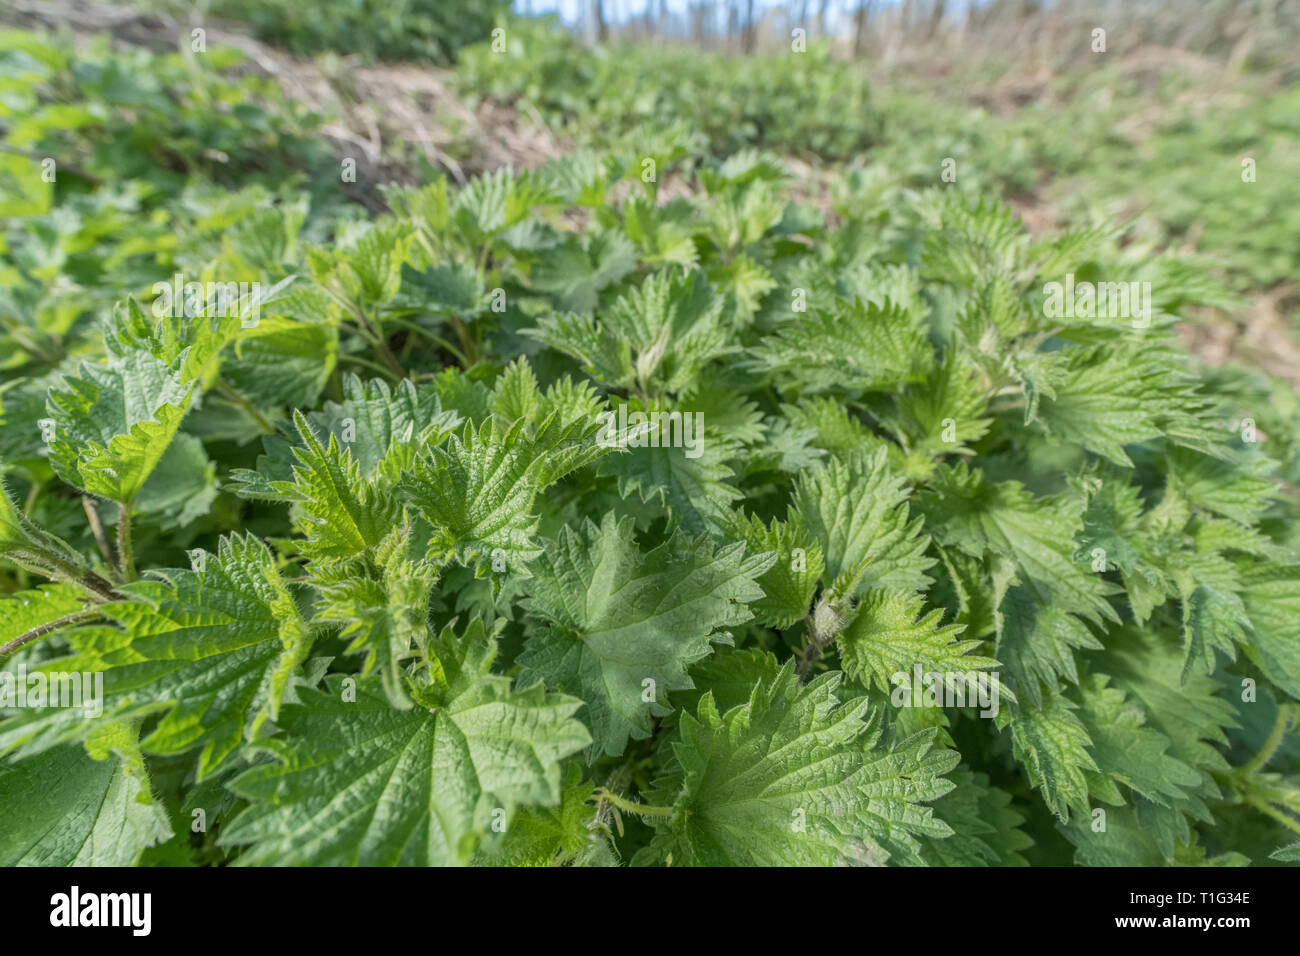 Foliage / leaves of common Stinging Nettle / Urtica dioica, a well-known foraged food for making nettle soup. Painful sting concept, bed of nettles. Stock Photo